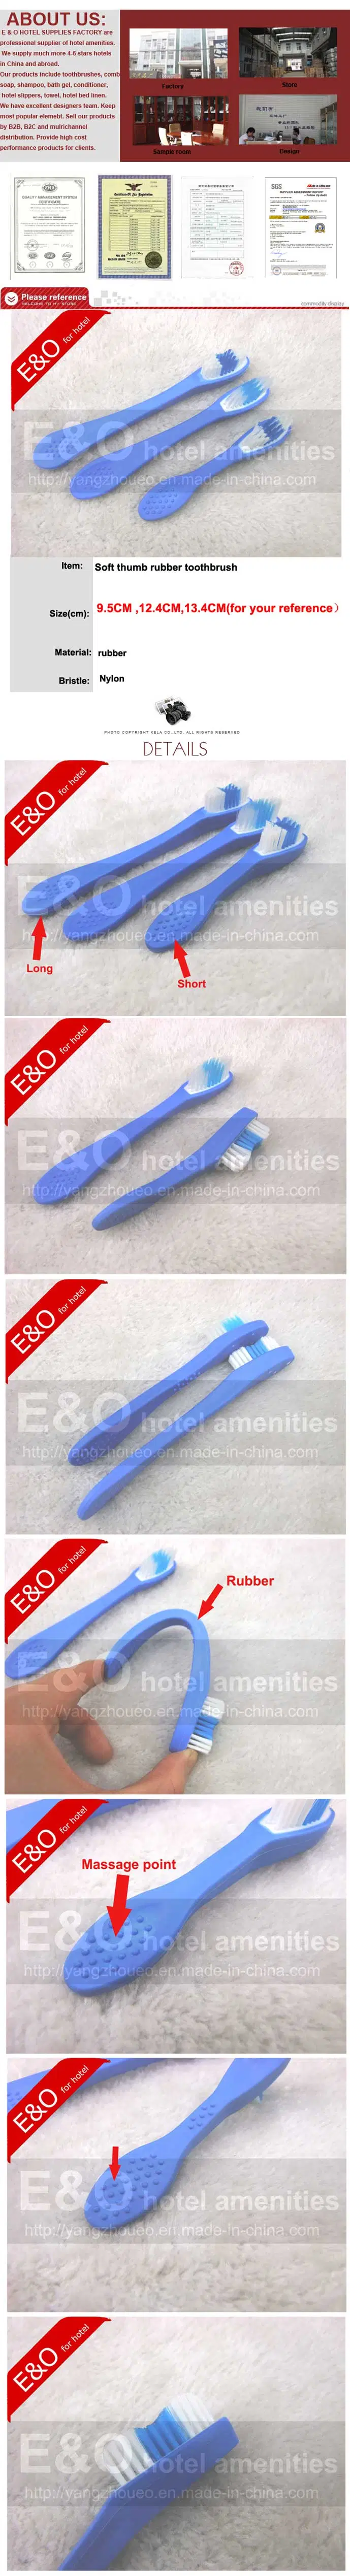 Soft Security Thumb Rubber Toothbrush with Nylon Bristle